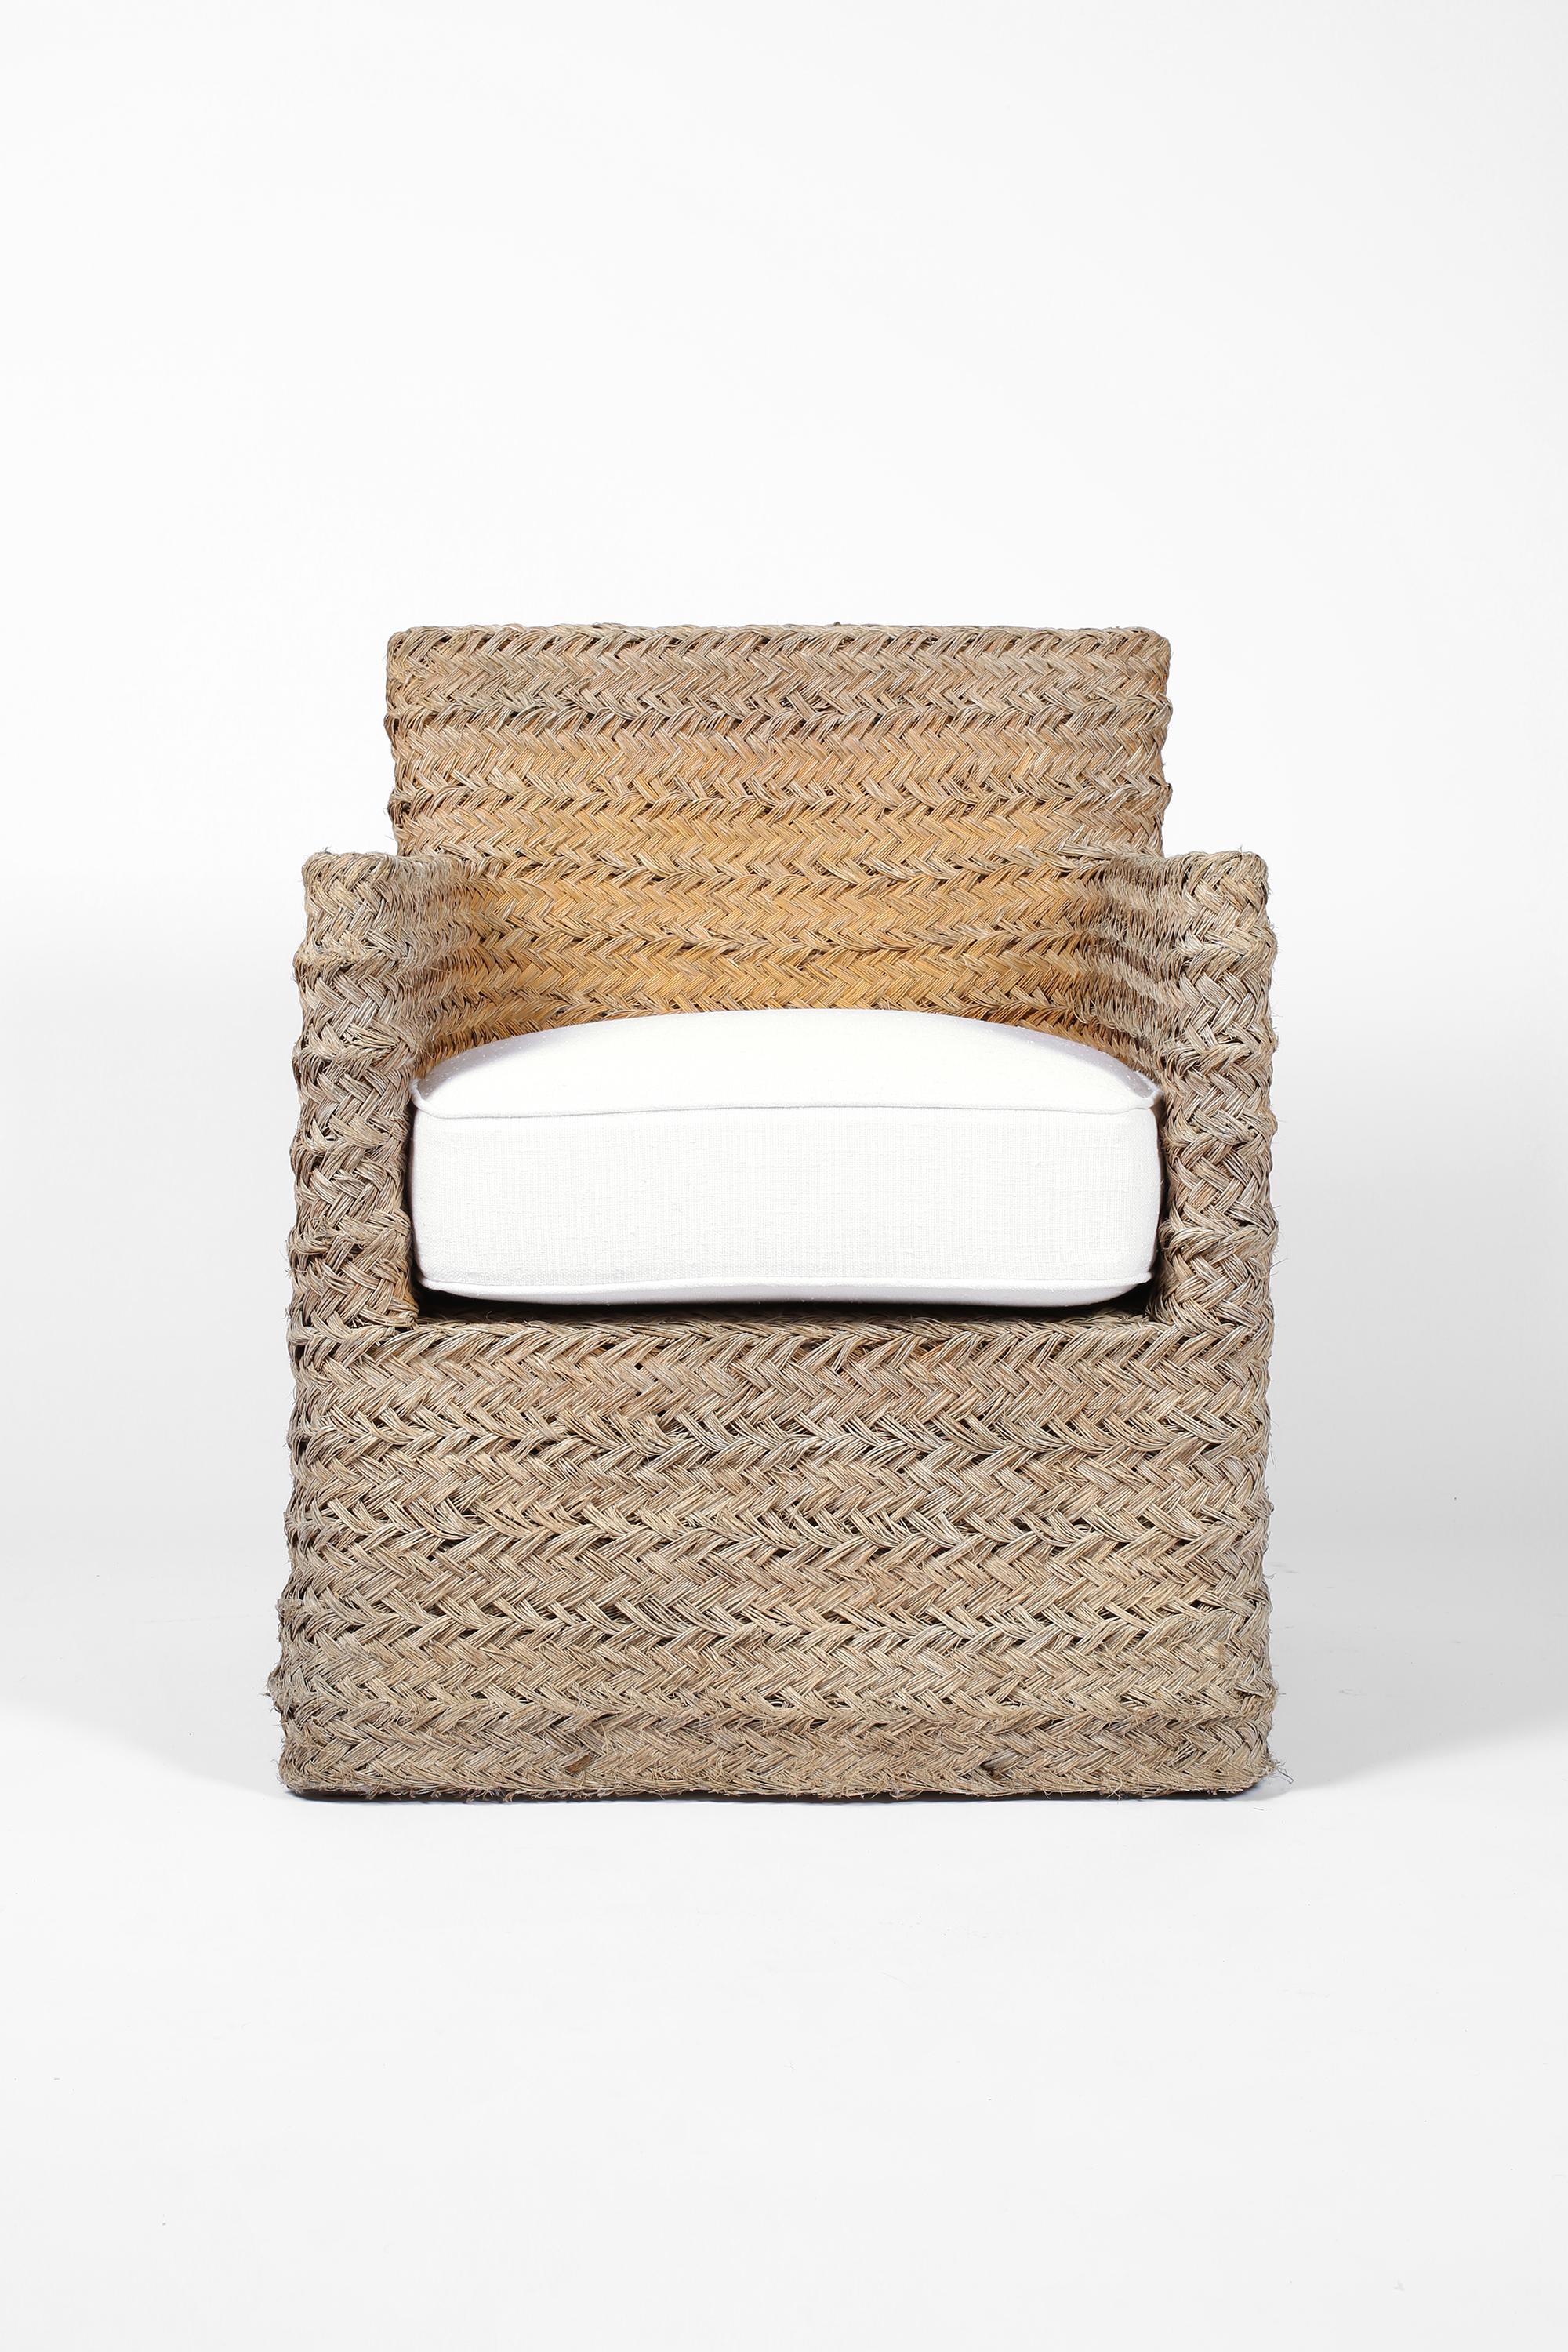 A braided straw armchair from Provence, with newly upholstered seat cushion in textured white linen. In the manner of Adrian Audoux & Frida Minnet. French, c. 1970s.